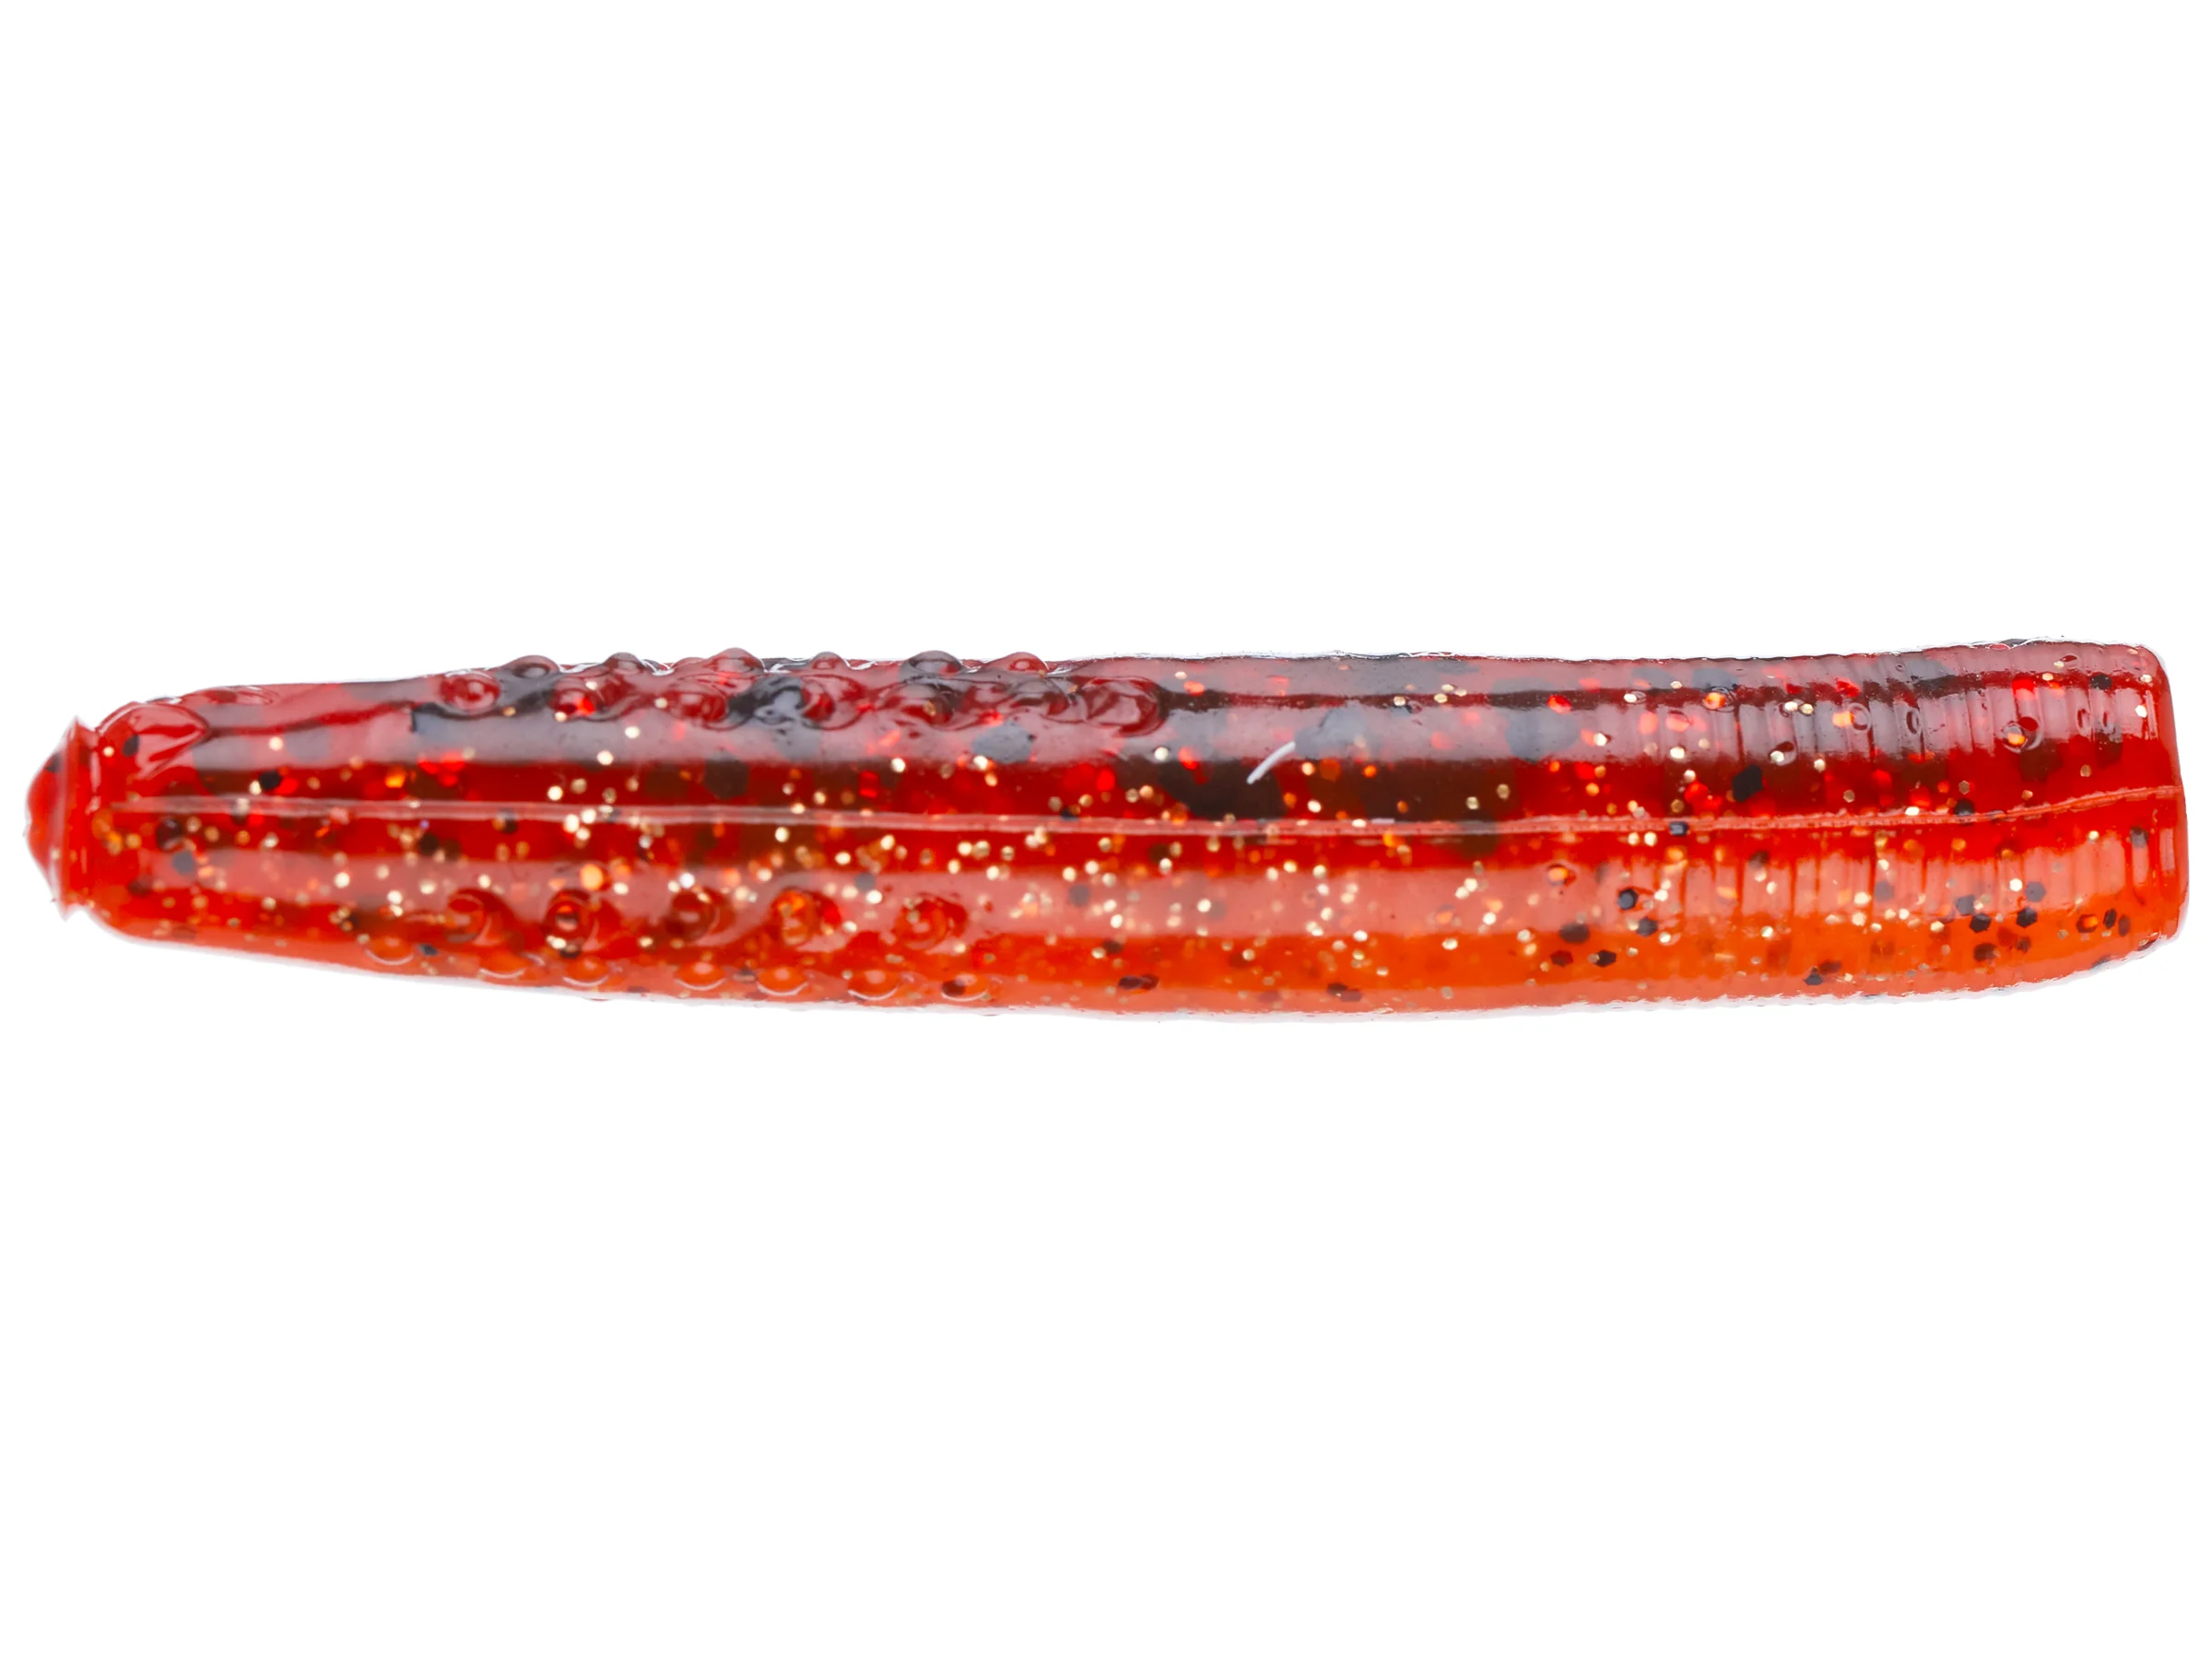 Ned Rig Worm Z-Man Micro Trd 1.75" col. 370 Fire Craw